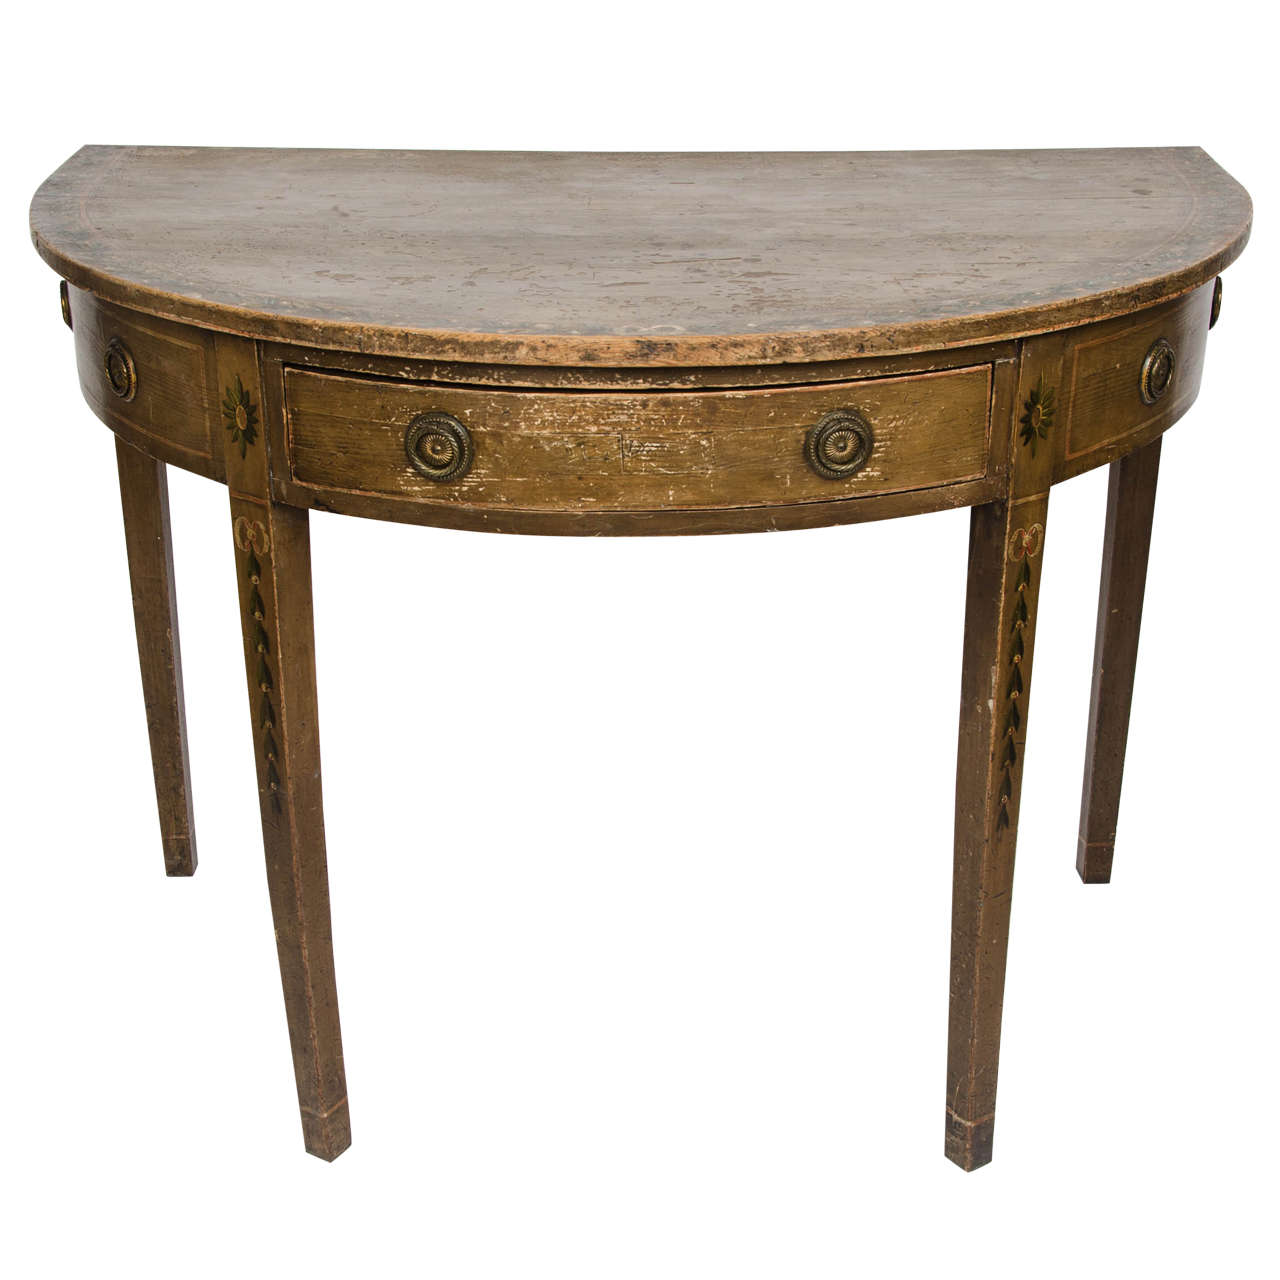 Large Regency Period Painted Demilune Console Table For Sale